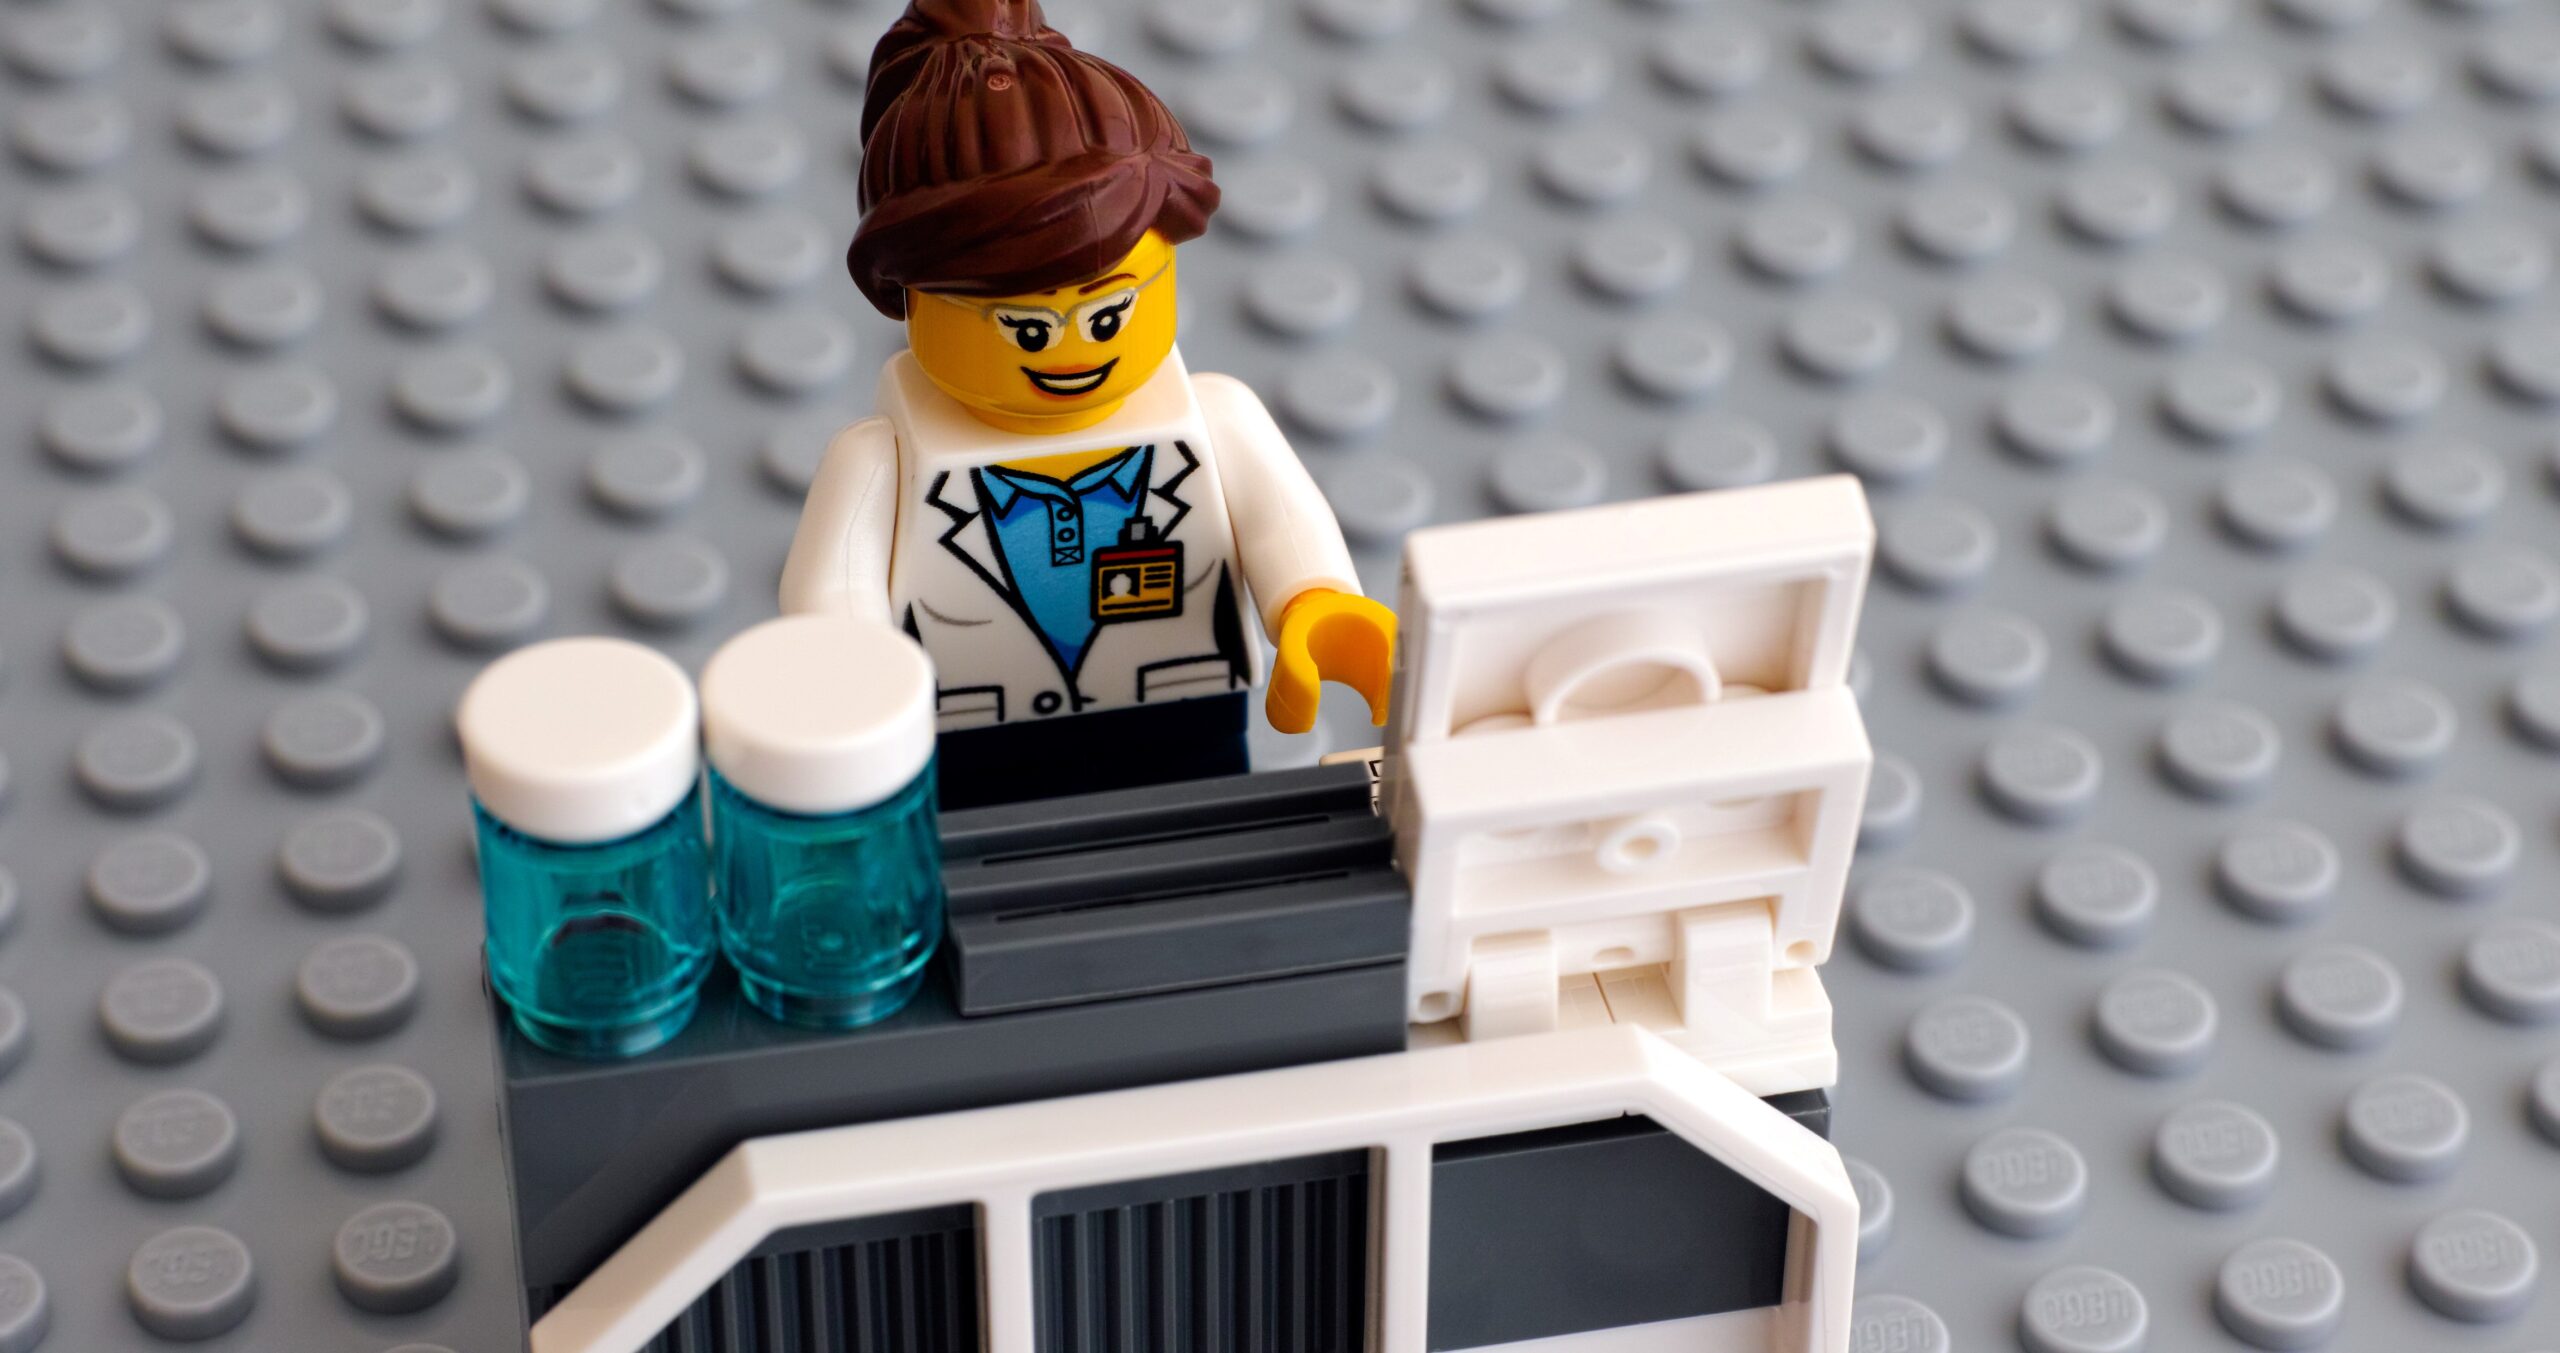 Lego scientist on her working place